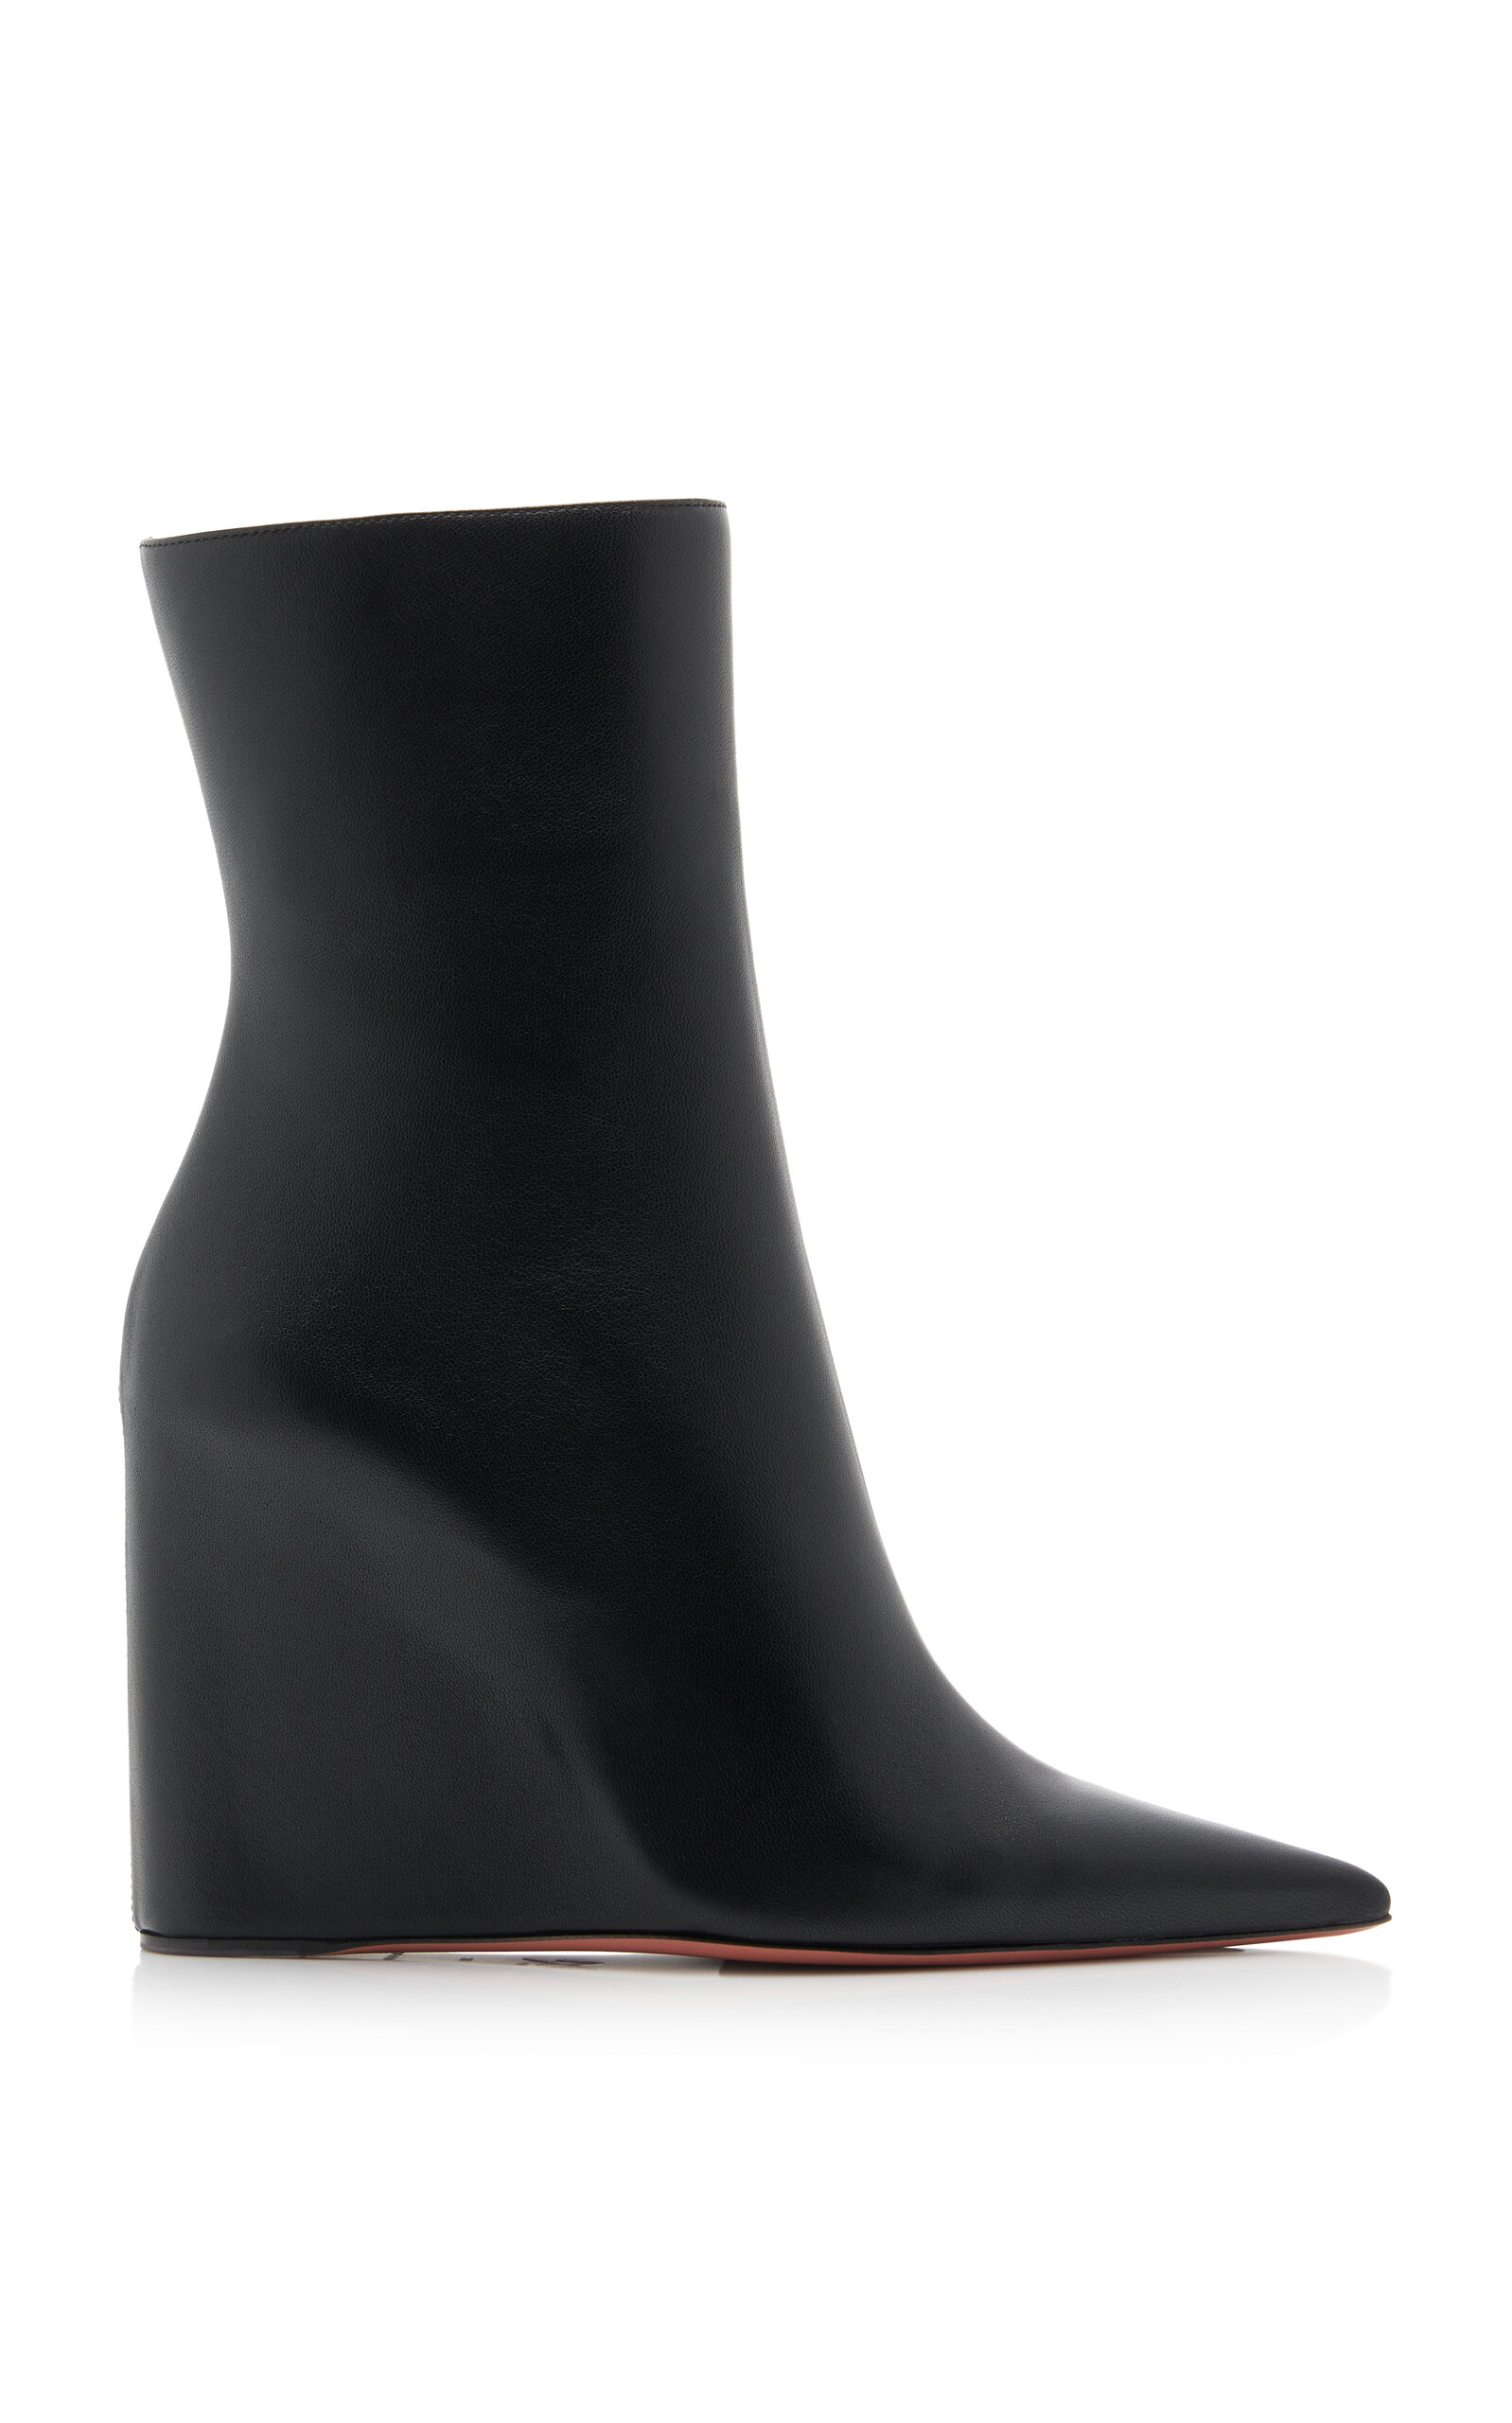 Amina Muaddi Pernille Leather Wedge Ankle Boots In Black